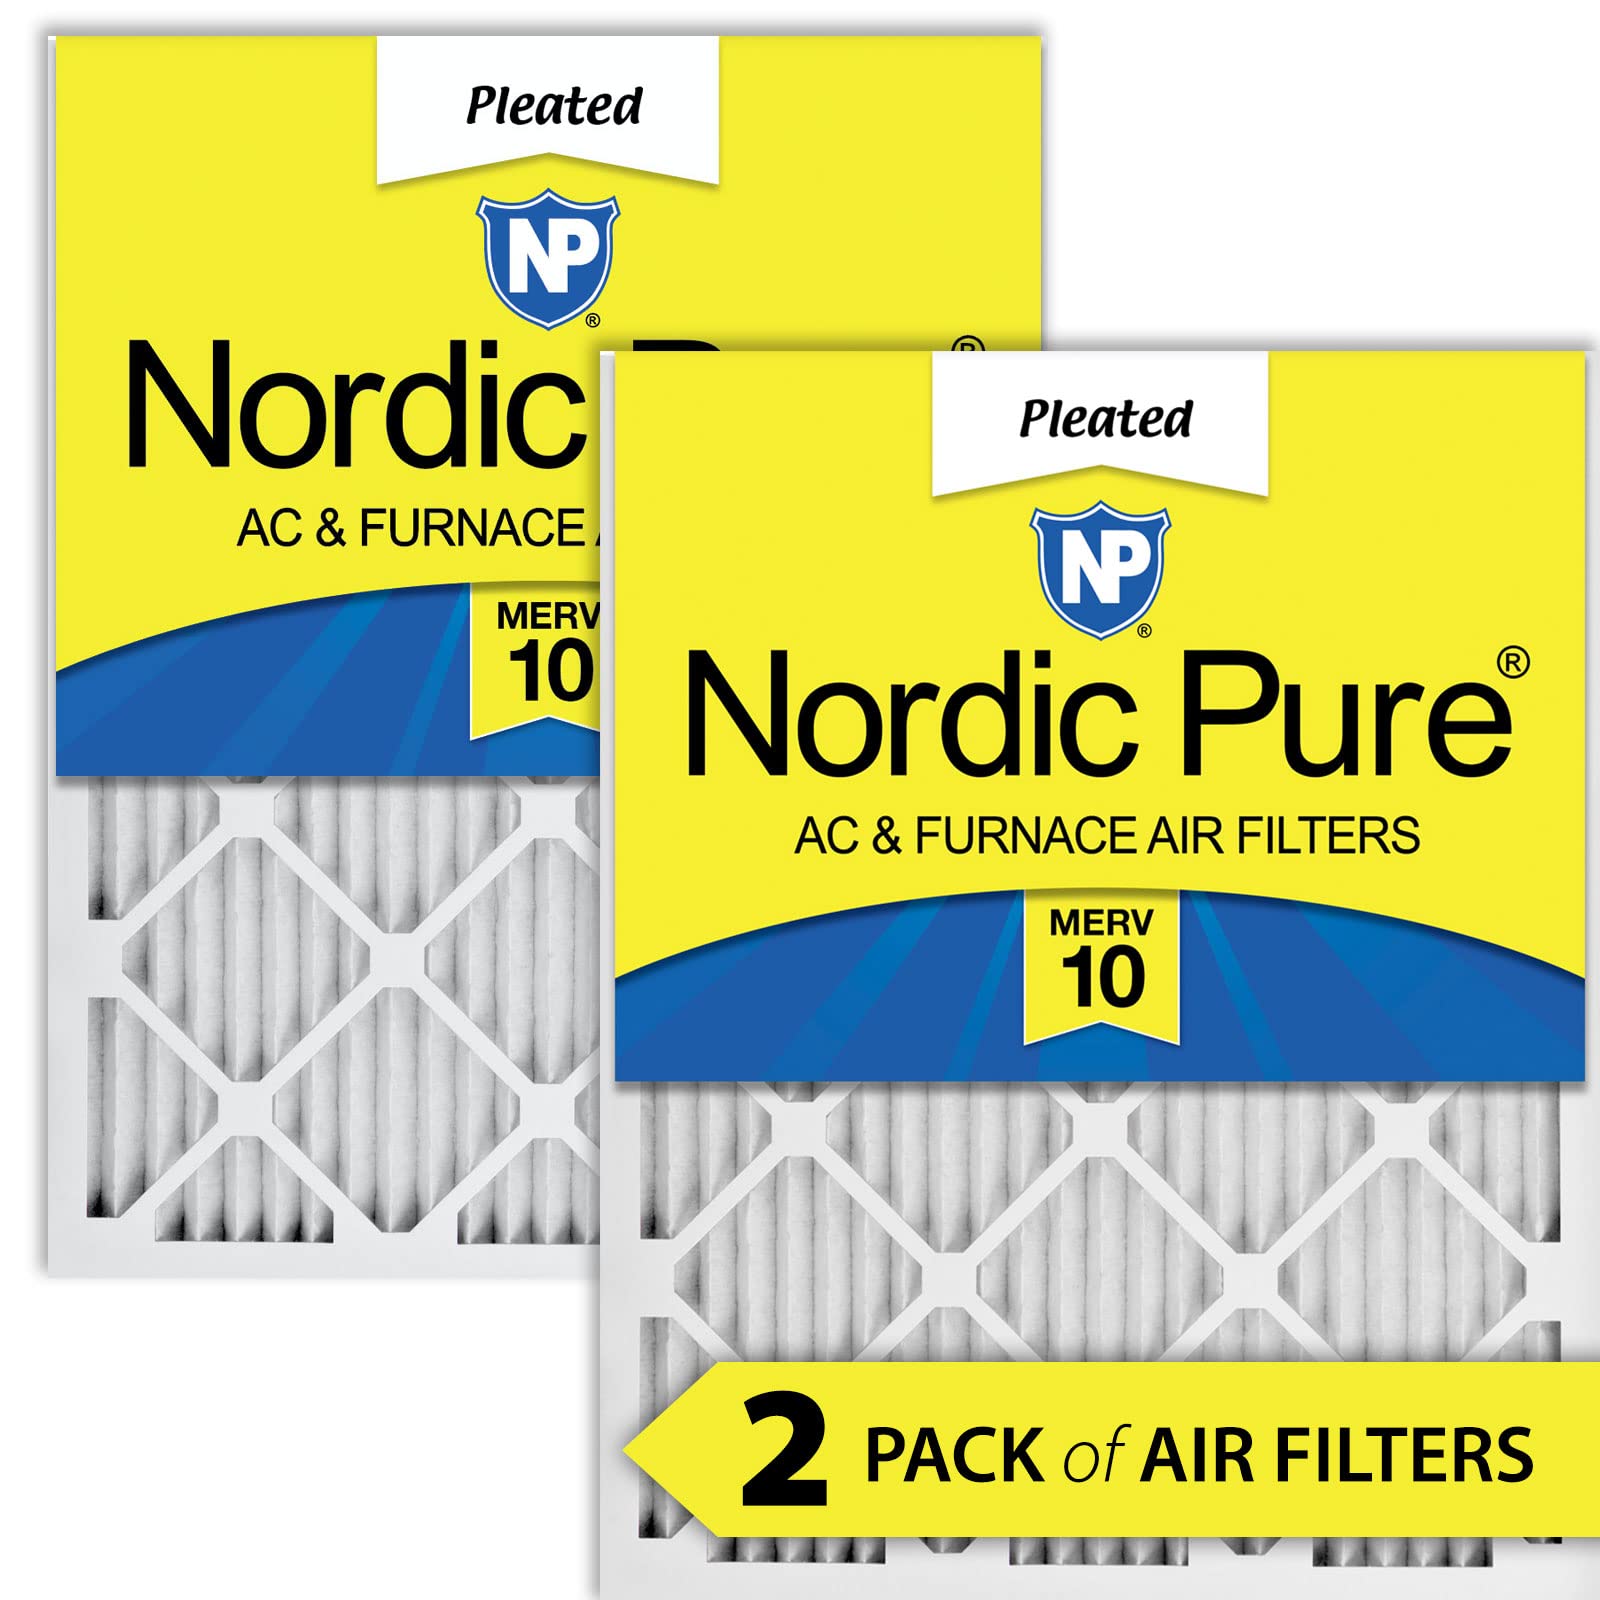 Nordic Pure 16x20x1 MERV Pleated AC Furnace Air Filter